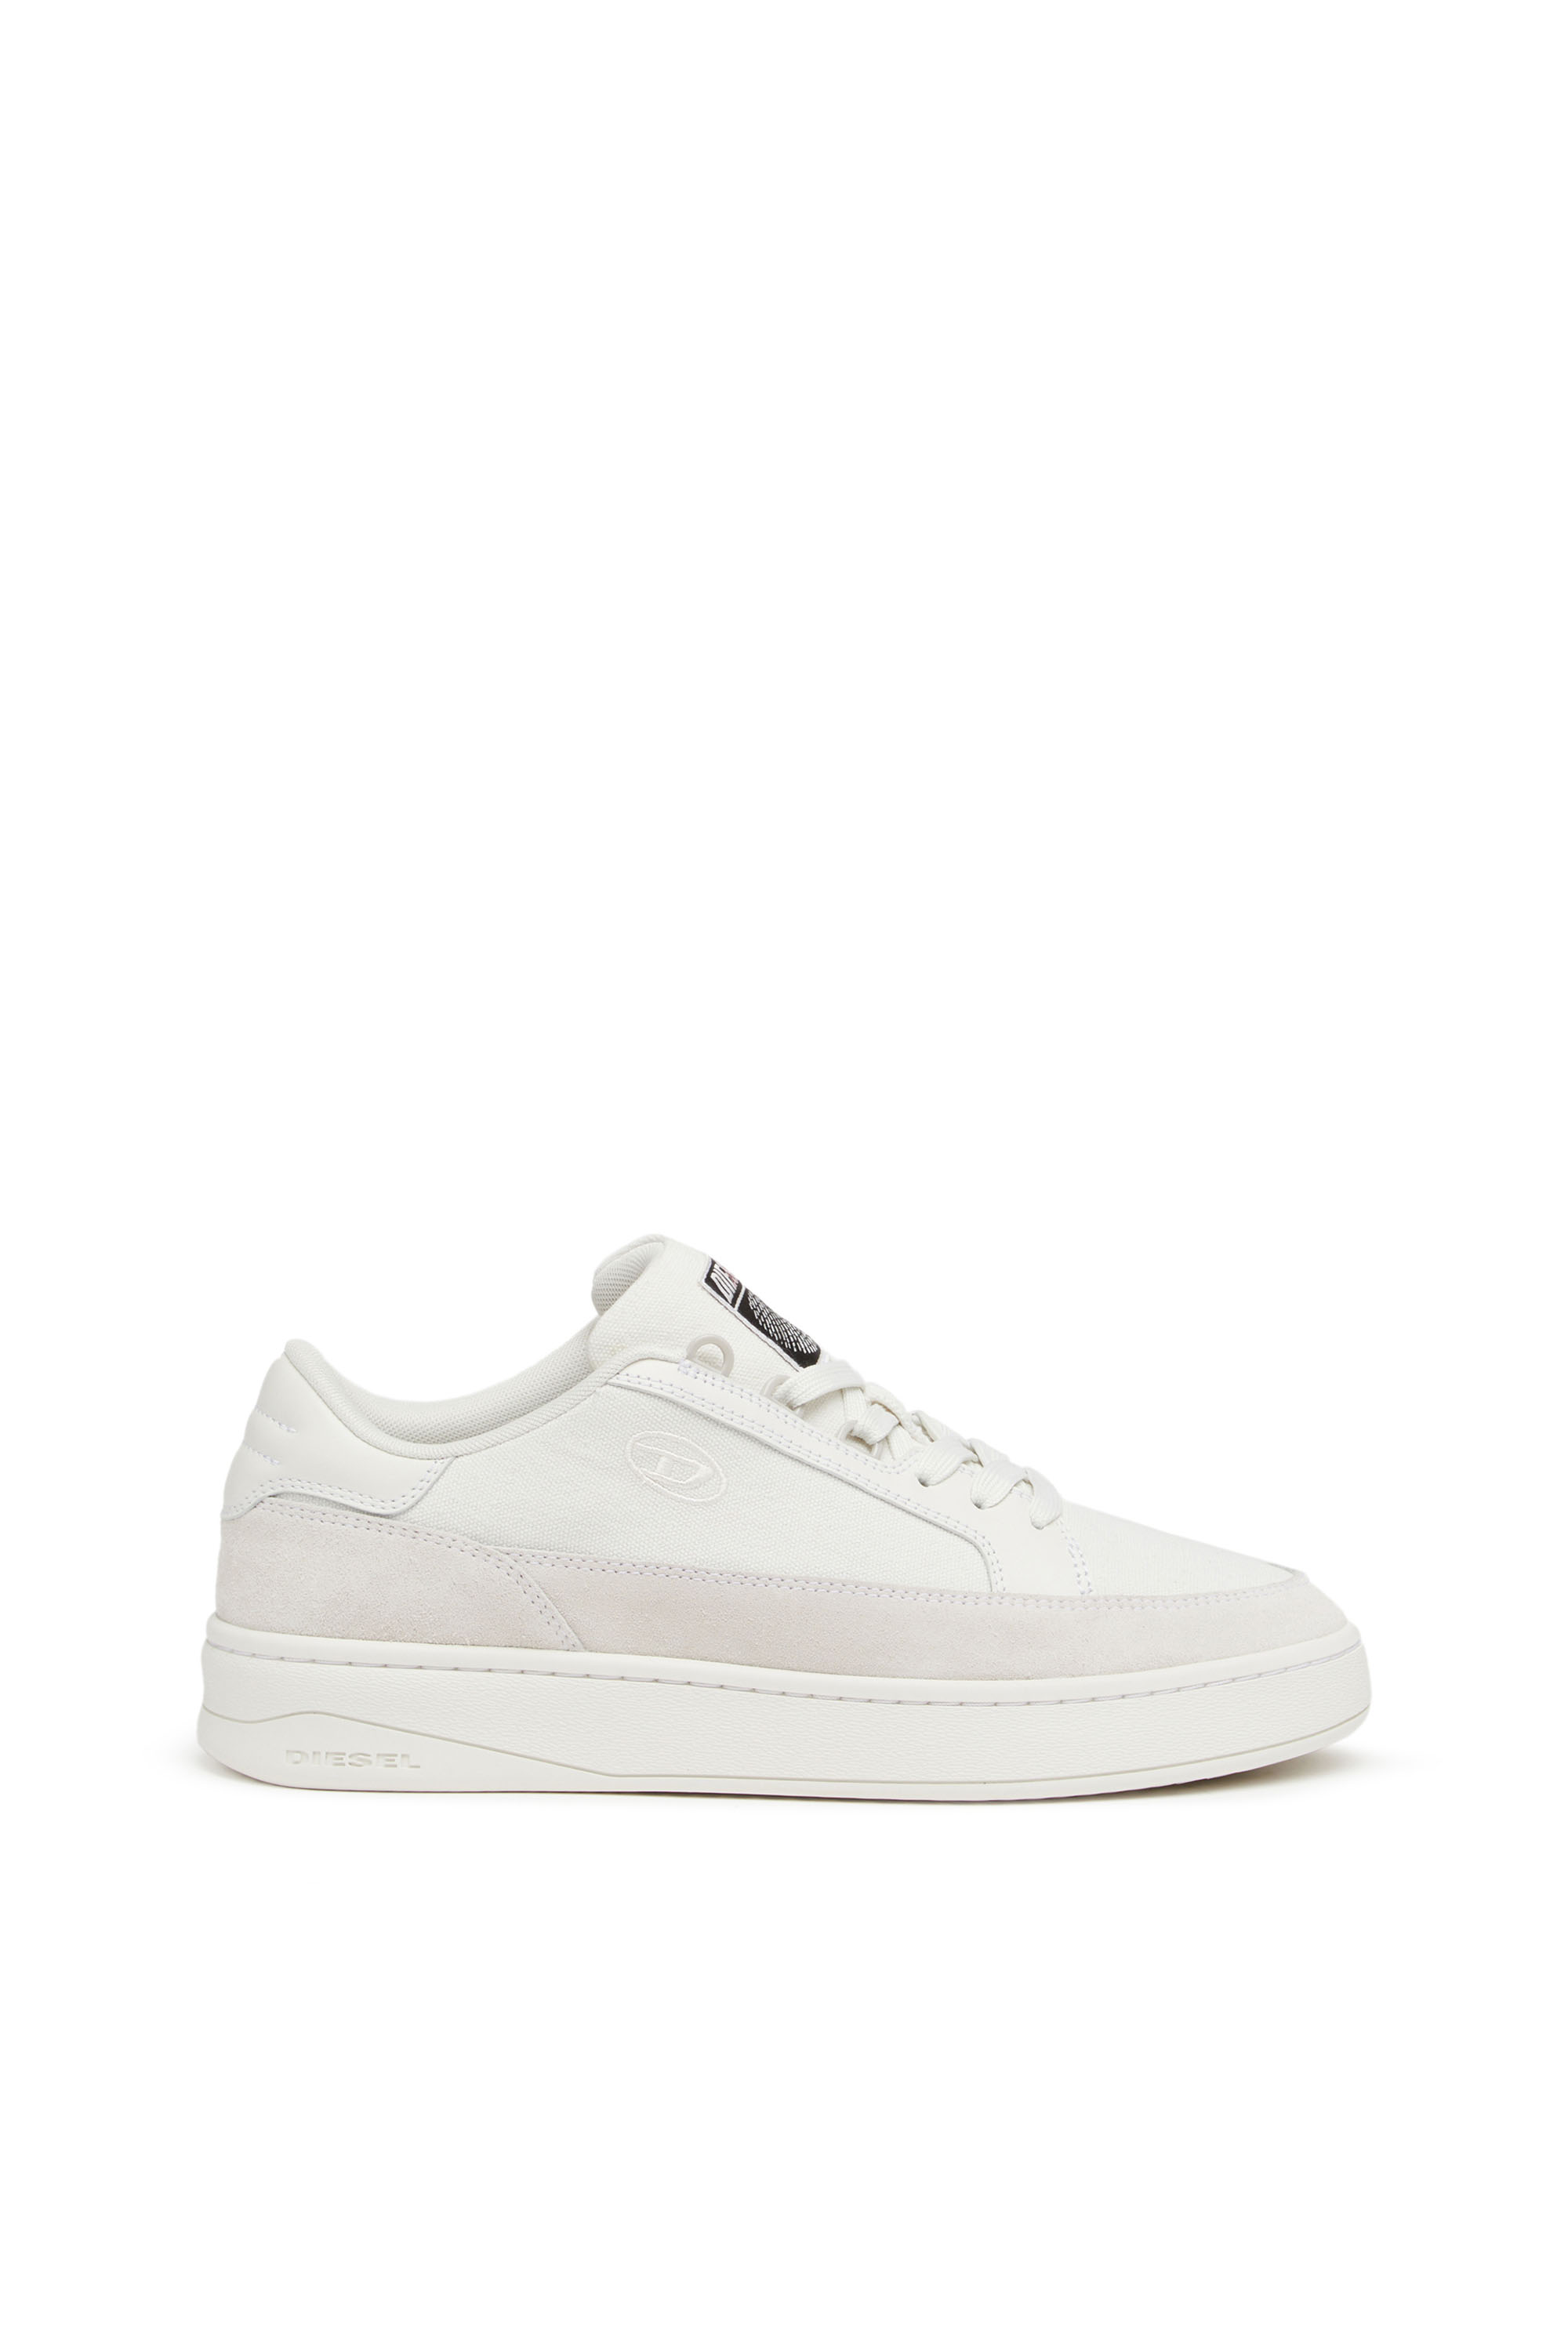 Diesel - S-Sinna Low - Sneakers in canvas and action leather - Sneakers - Man - White